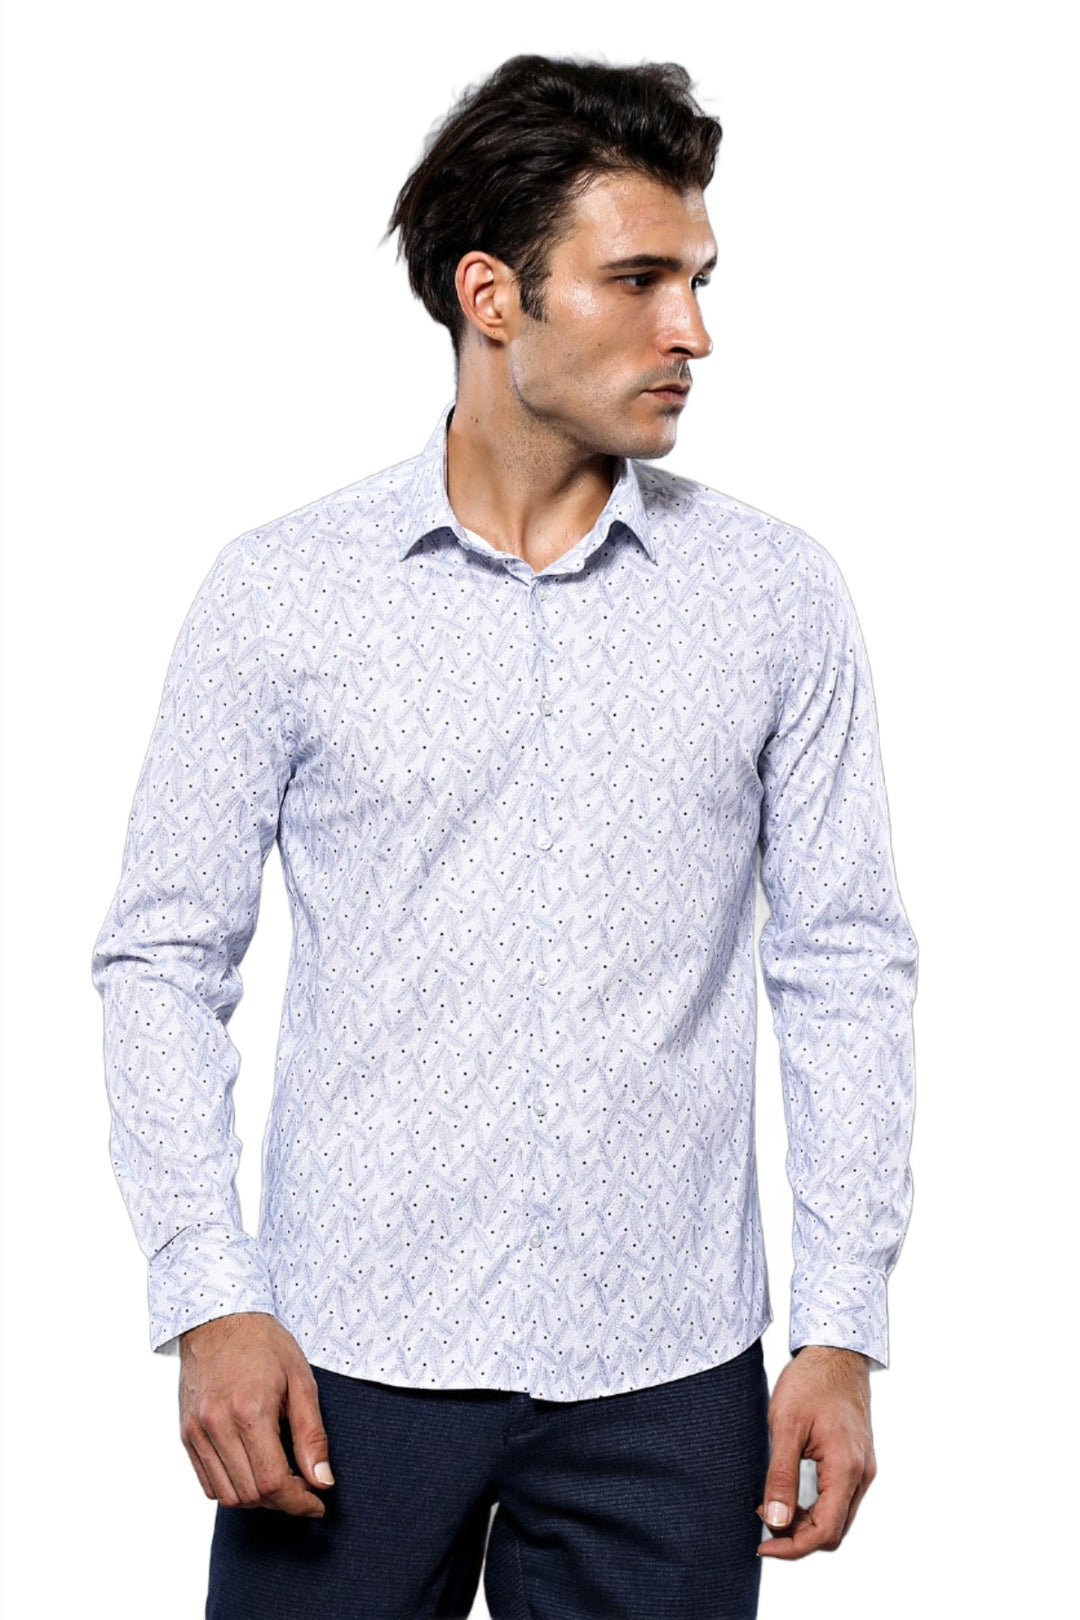 Dot-Patterned White Shirt | Wessi